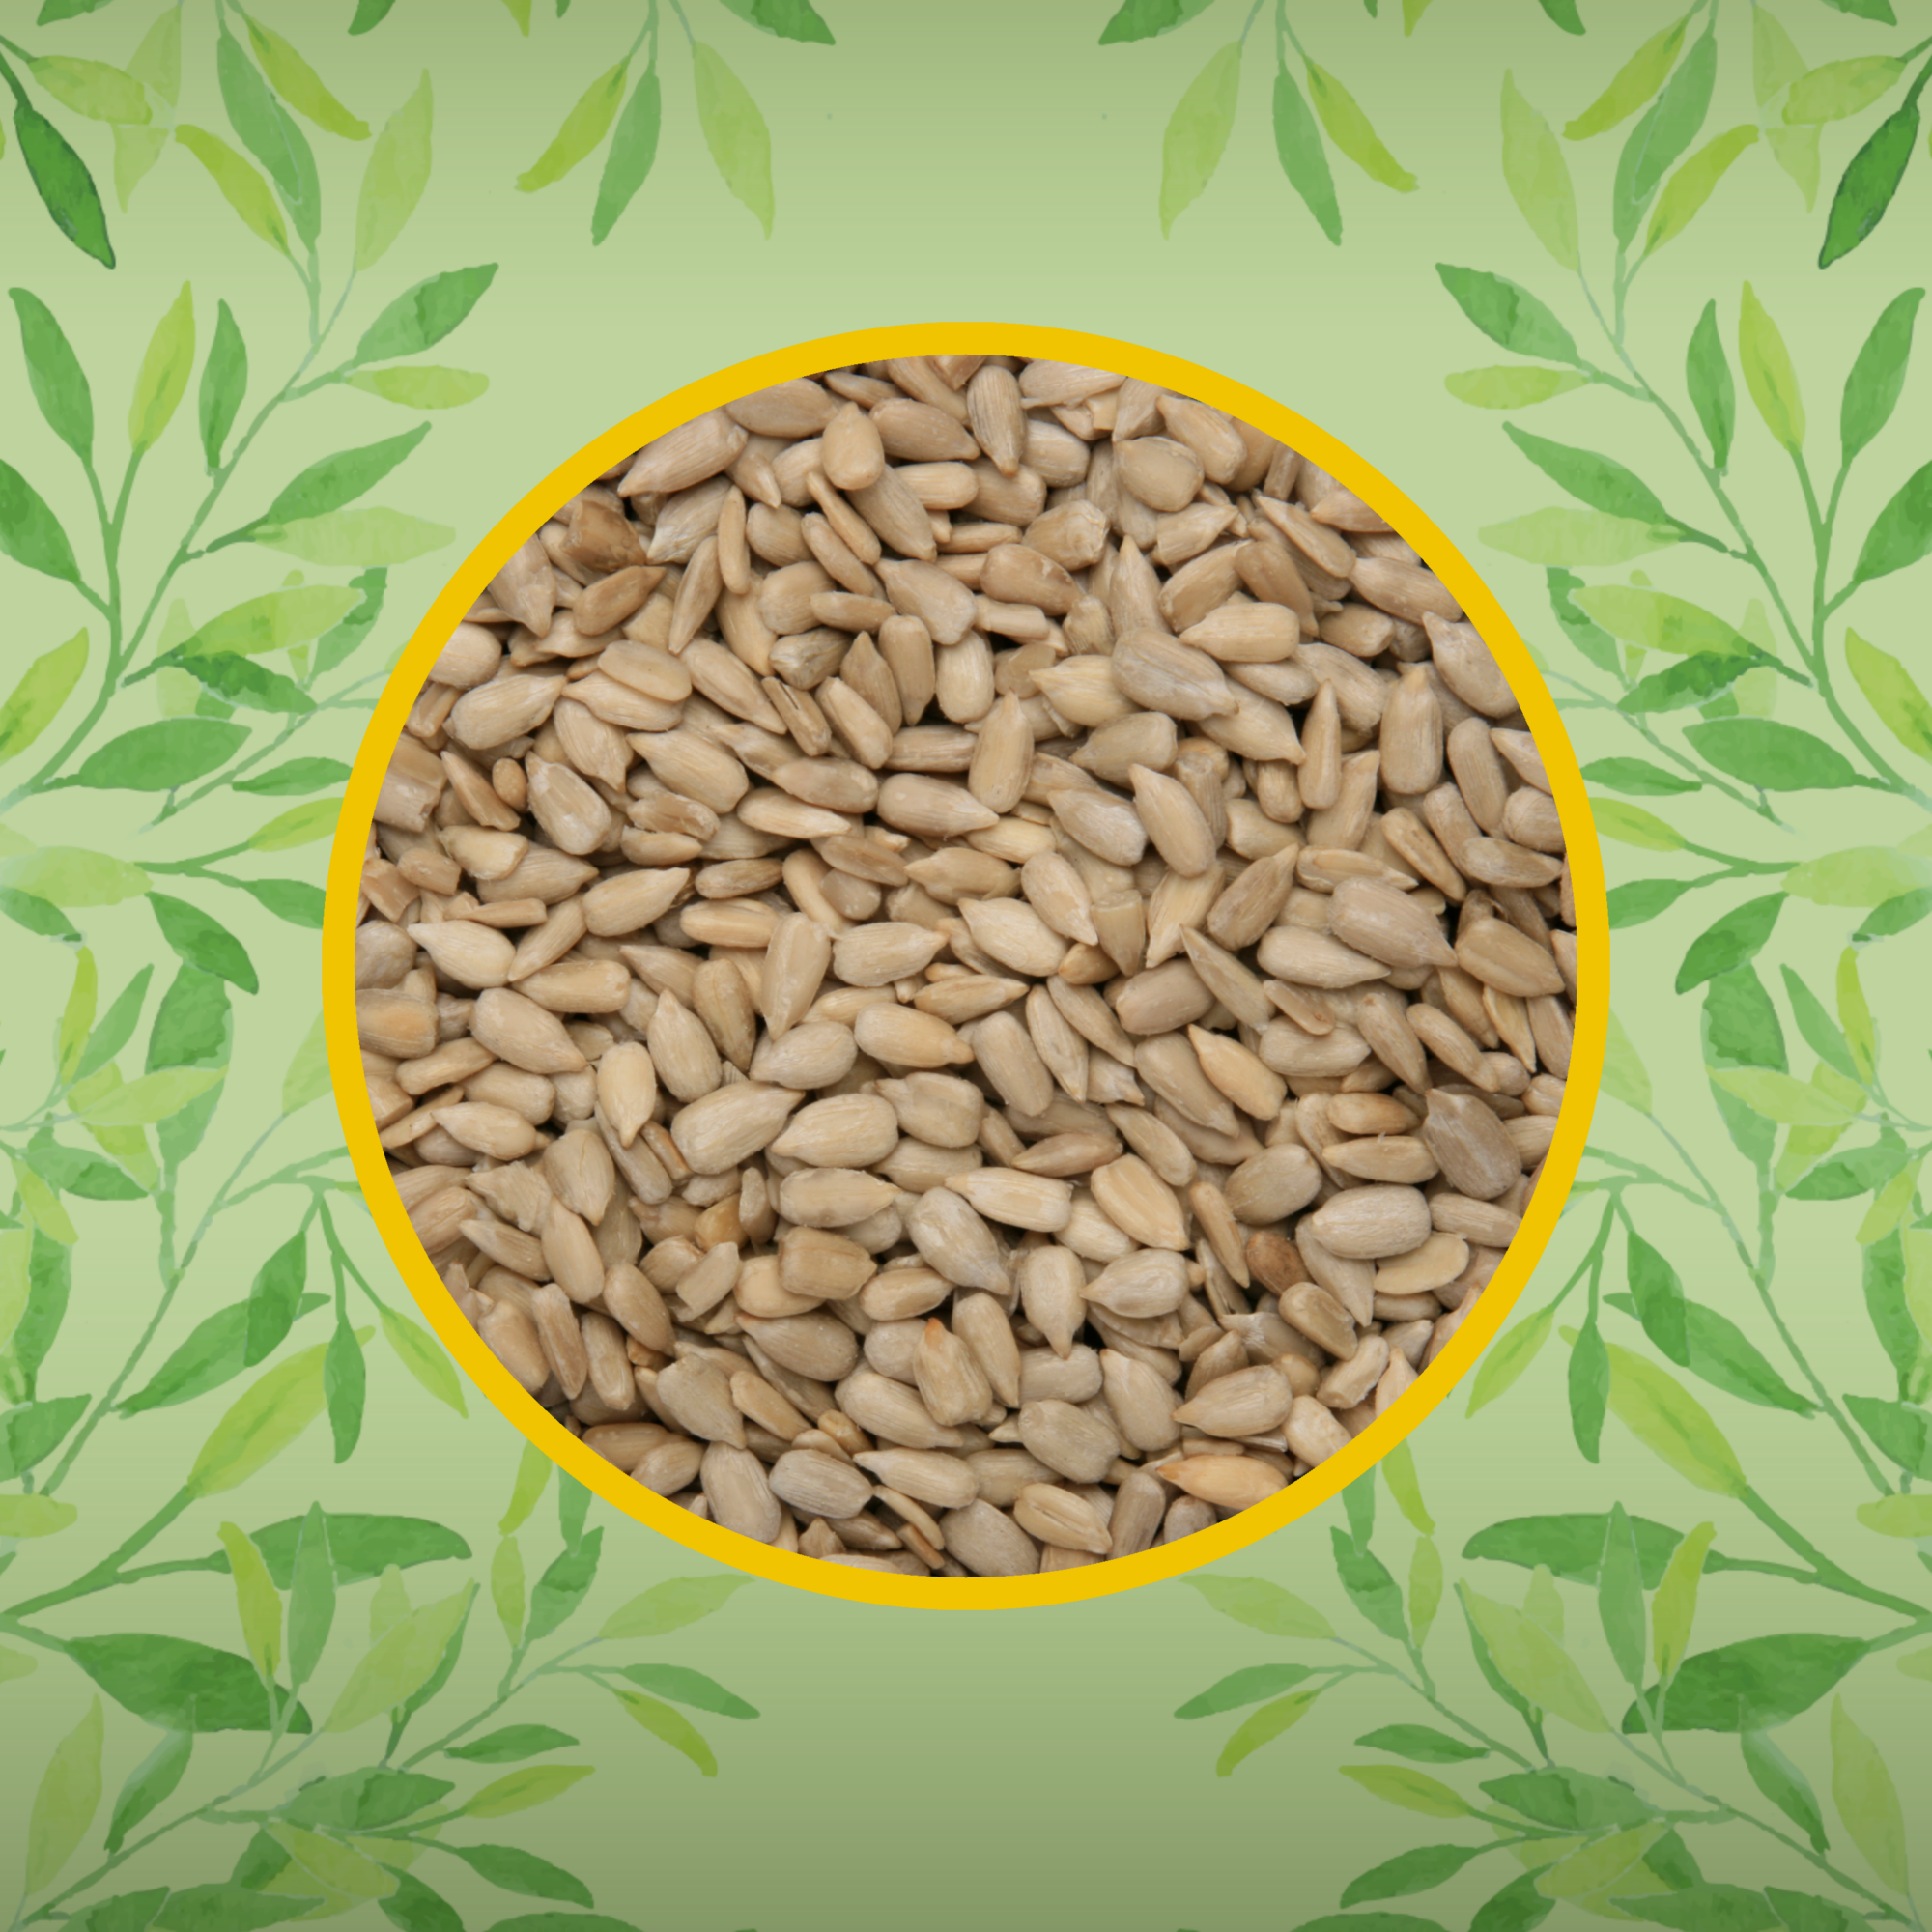 Picture of sunflower seeds